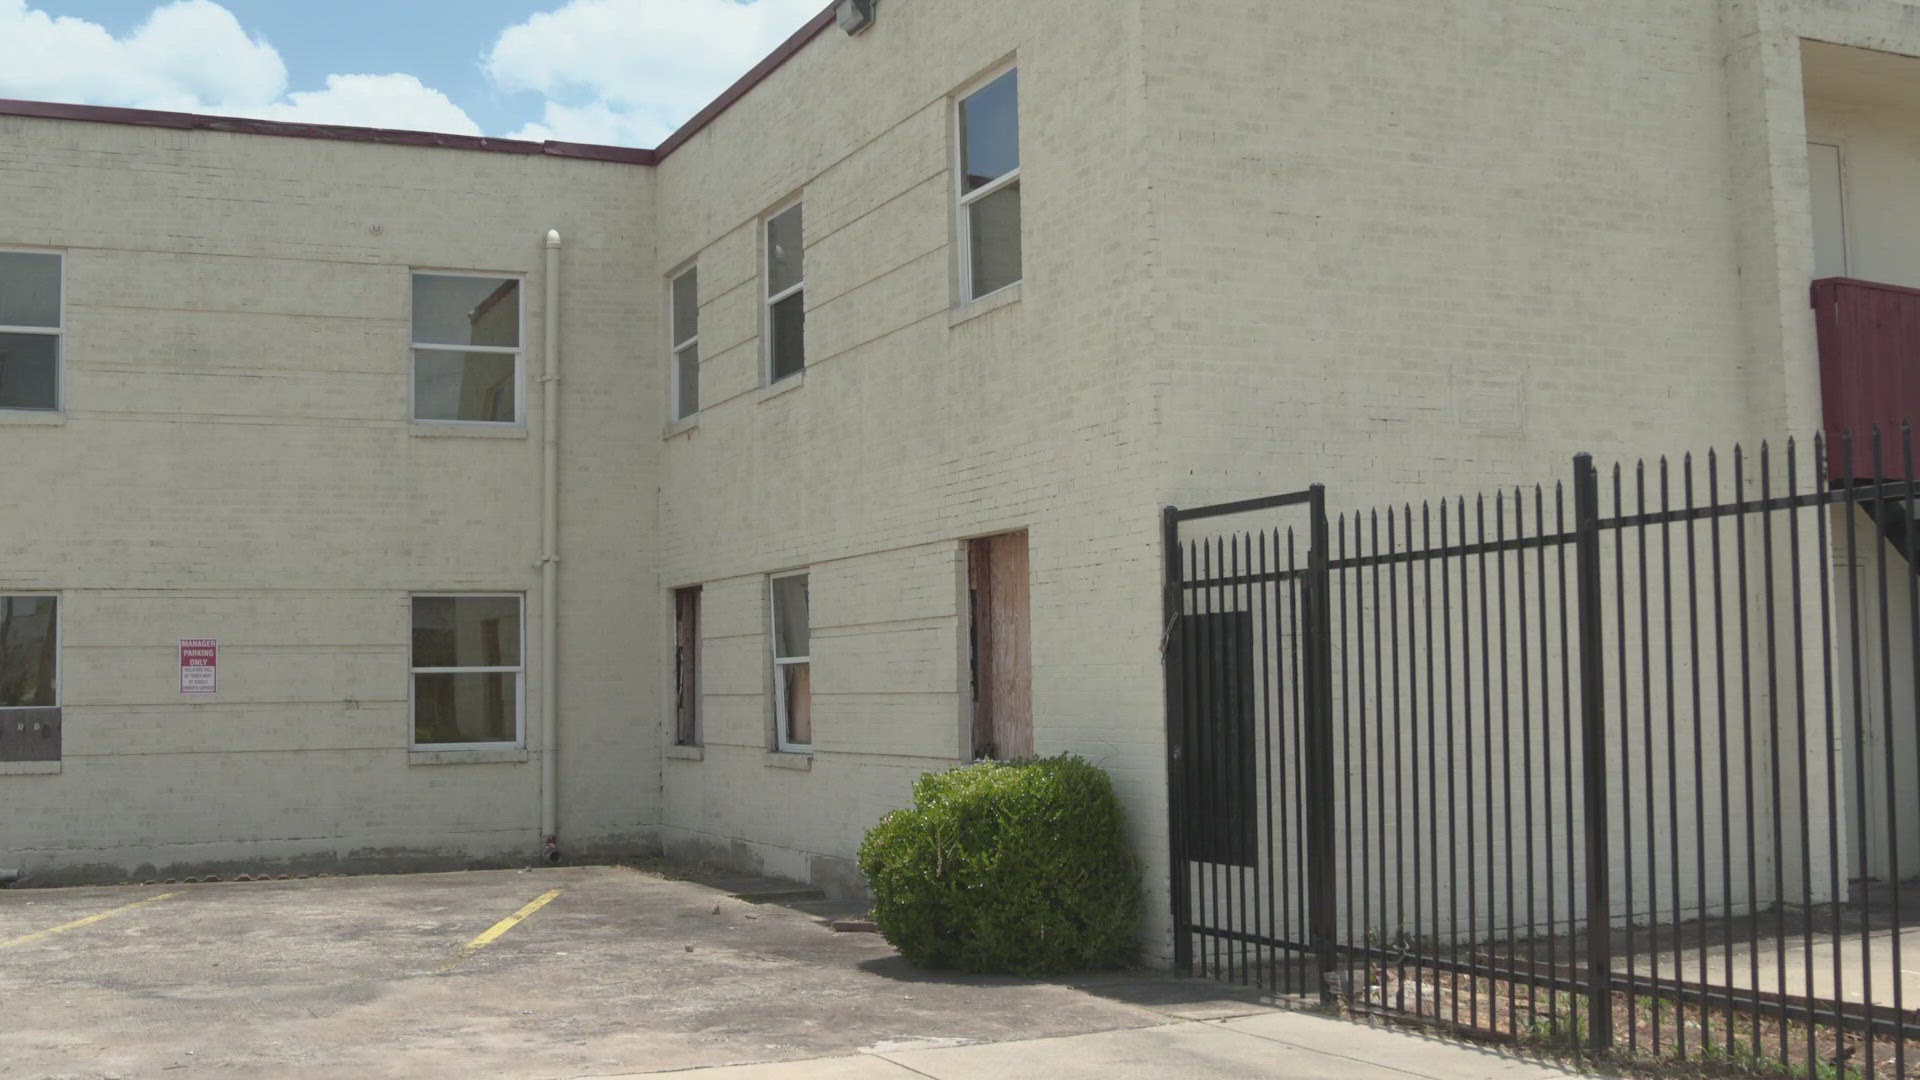 The permanent supportive housing facility planned for 1950 Fort Worth Ave. finally has an operator.